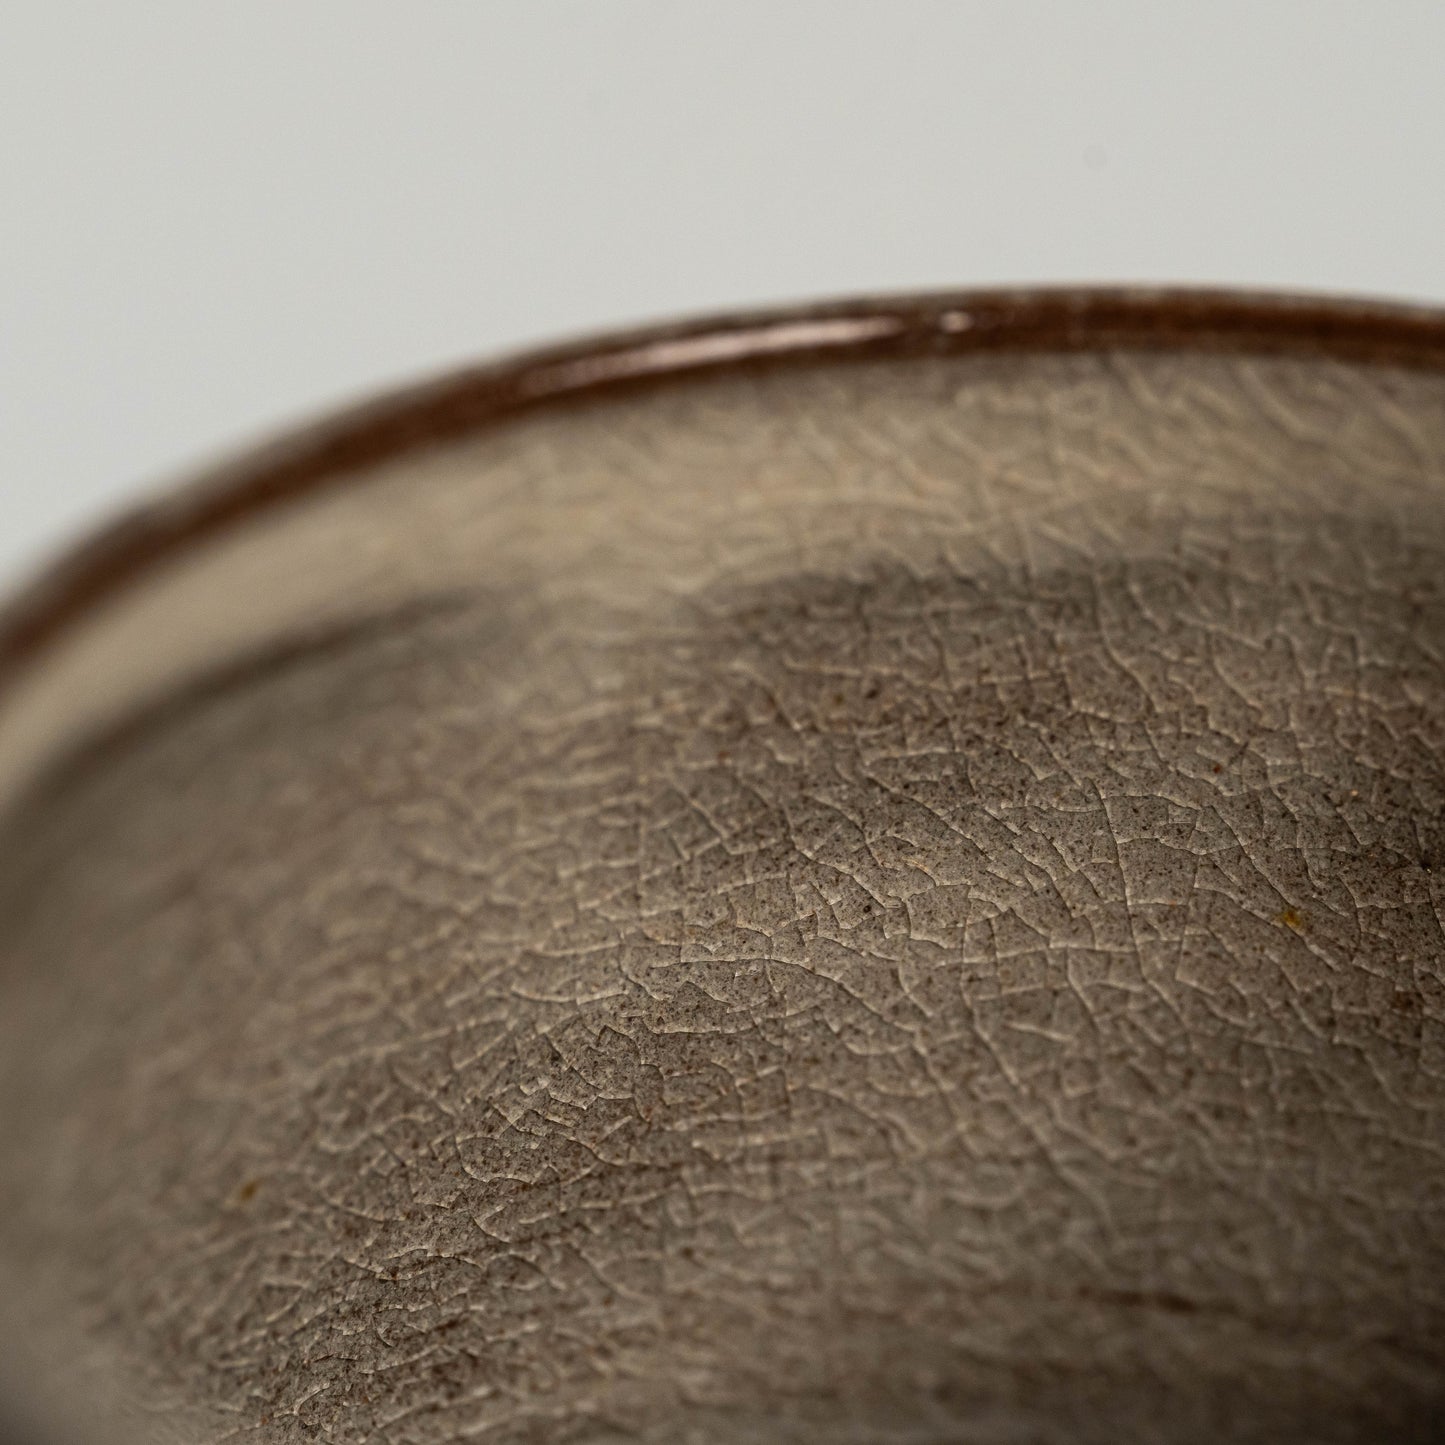 A close up of a brown Hagi yaki teacup on a white background